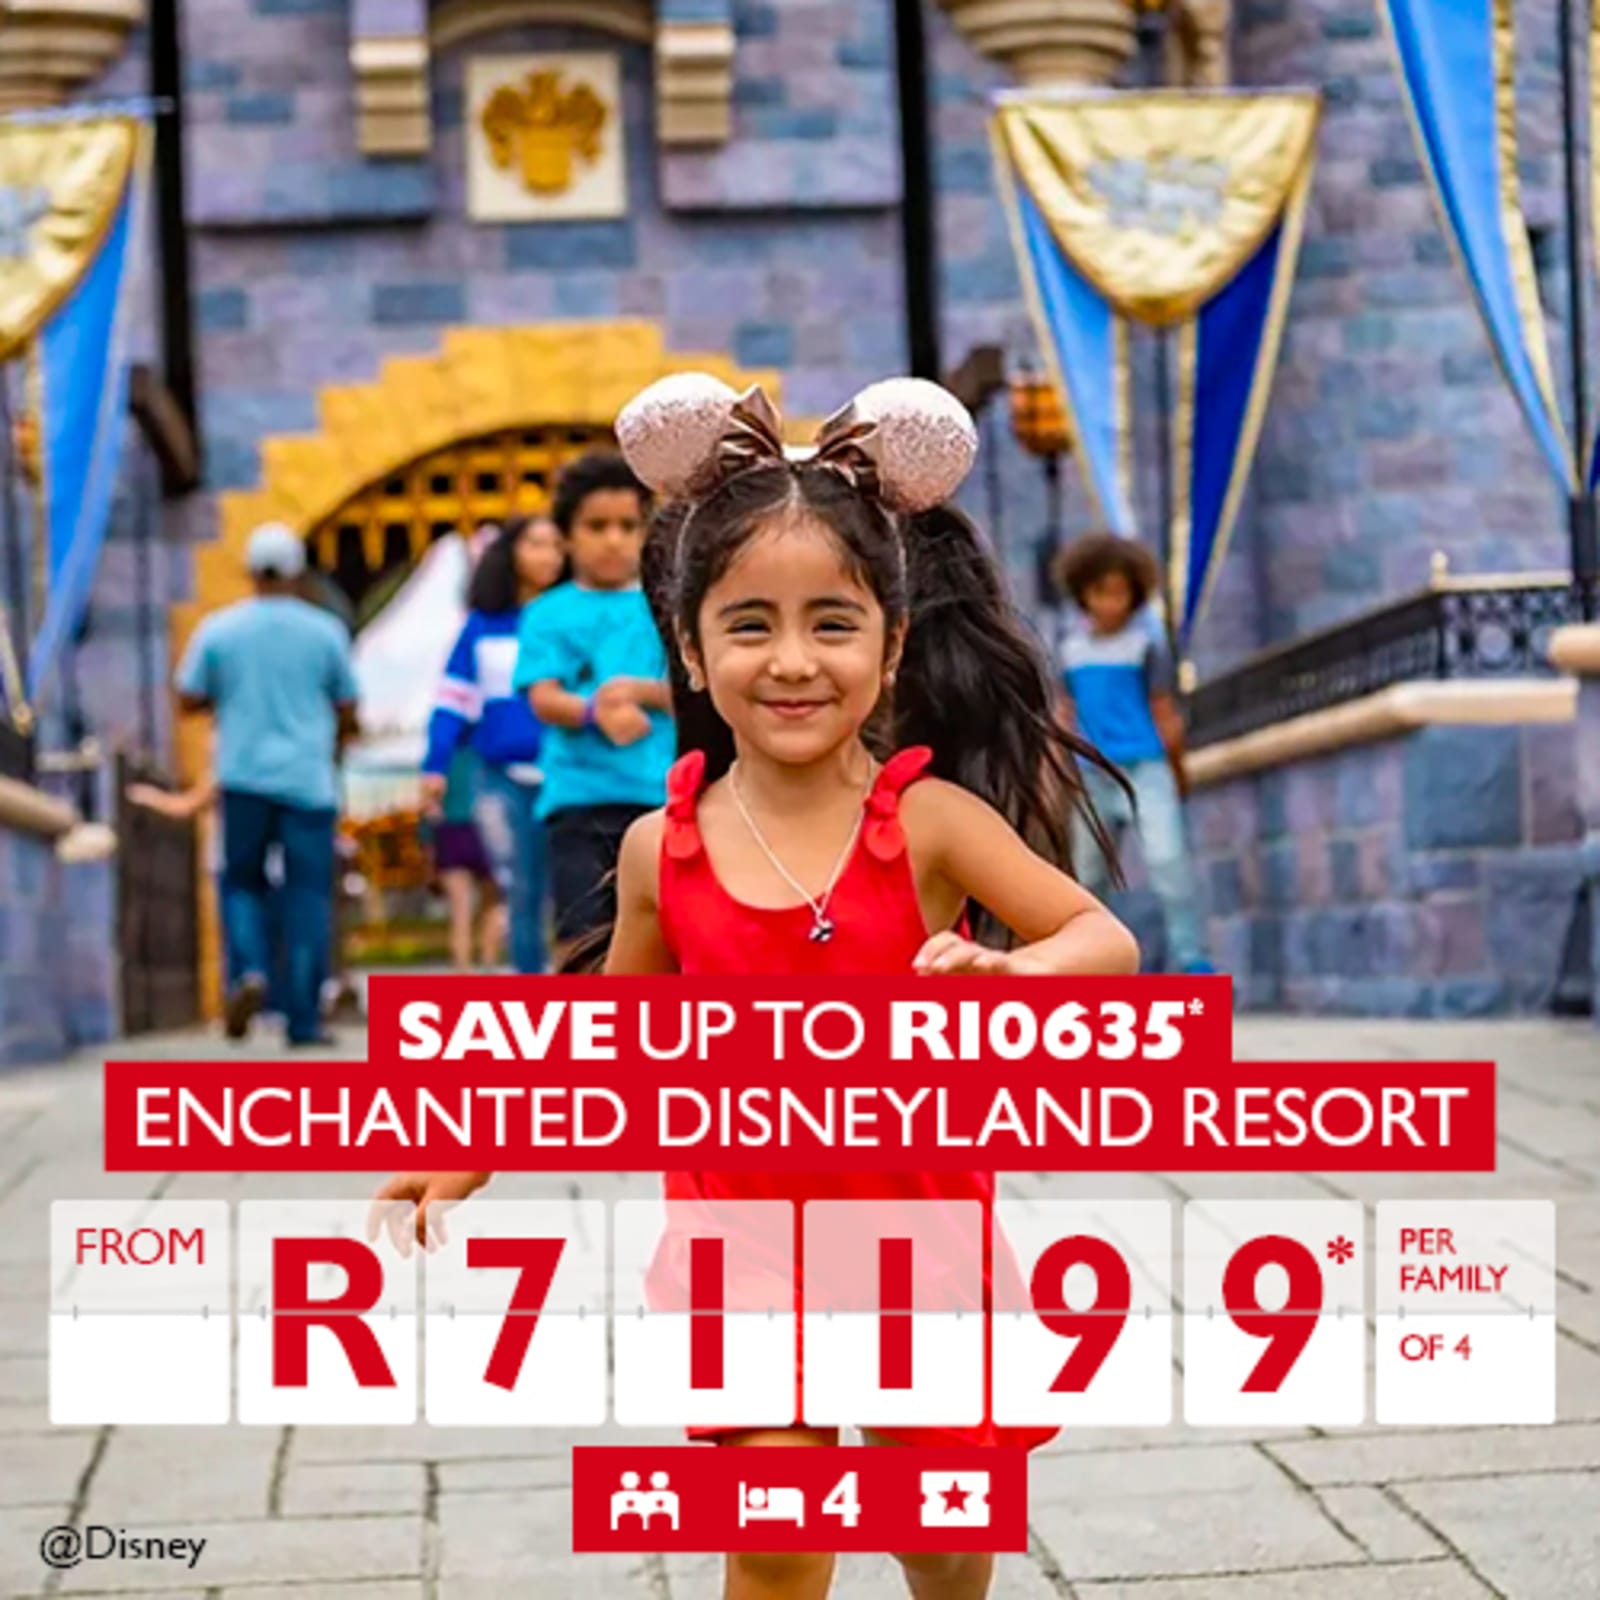 Save up to R10635* Enchanted Disneyland Resort from R71199* per family of 4